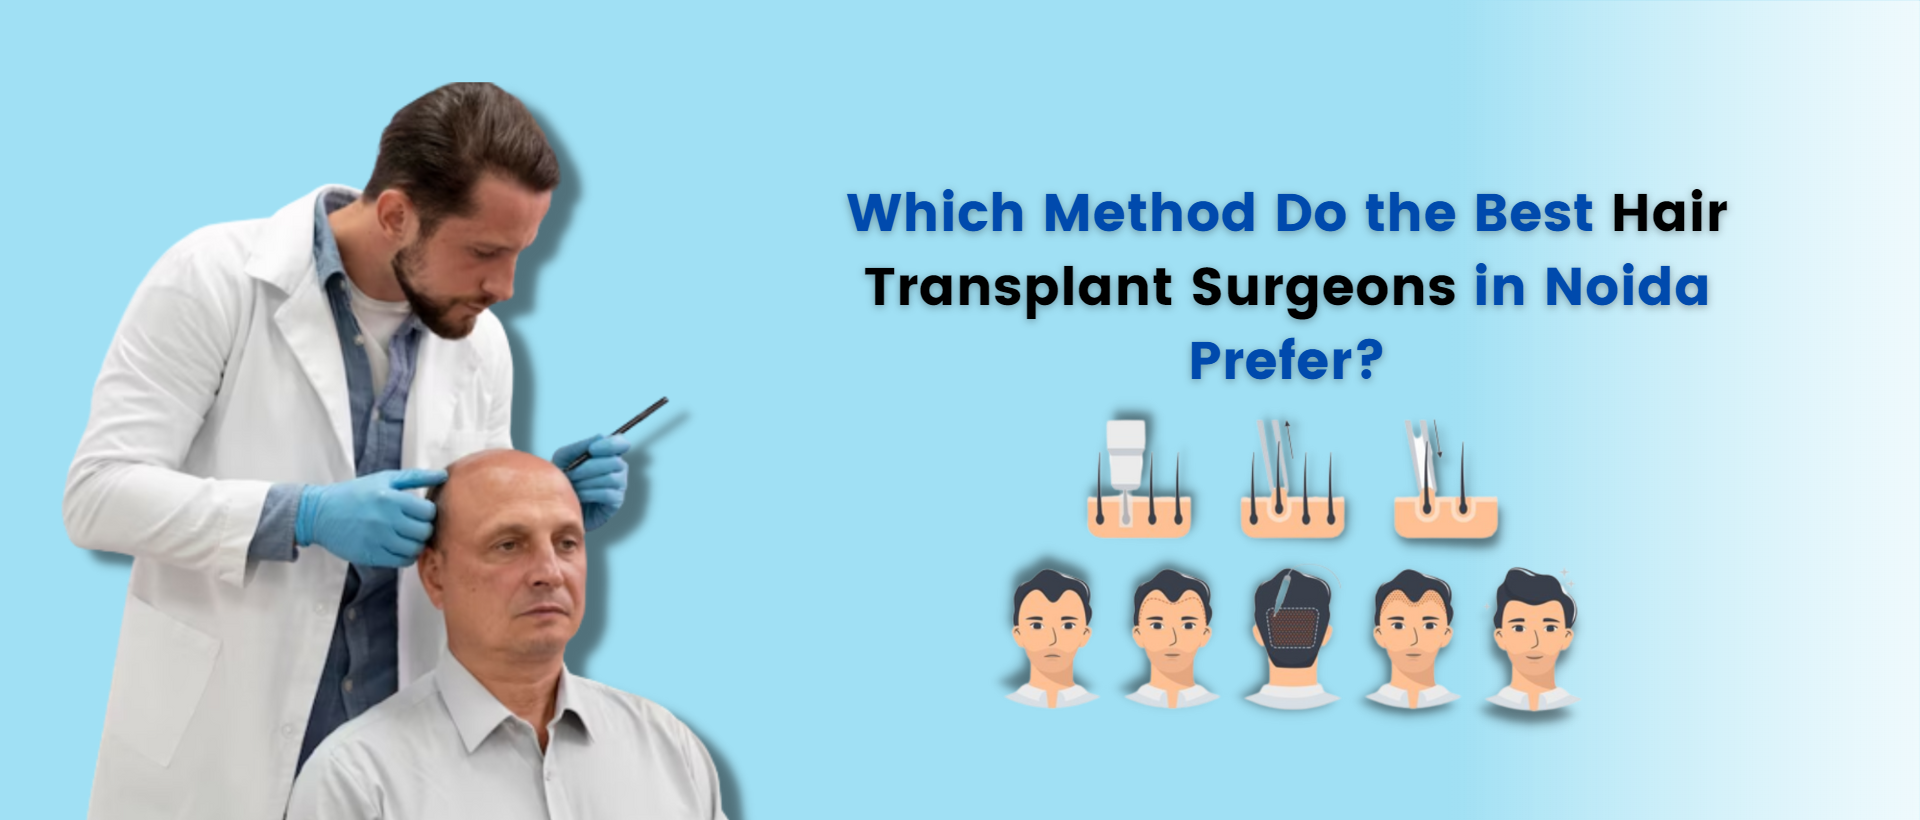 Which method do the best hair transplant surgeons in noida prefer?